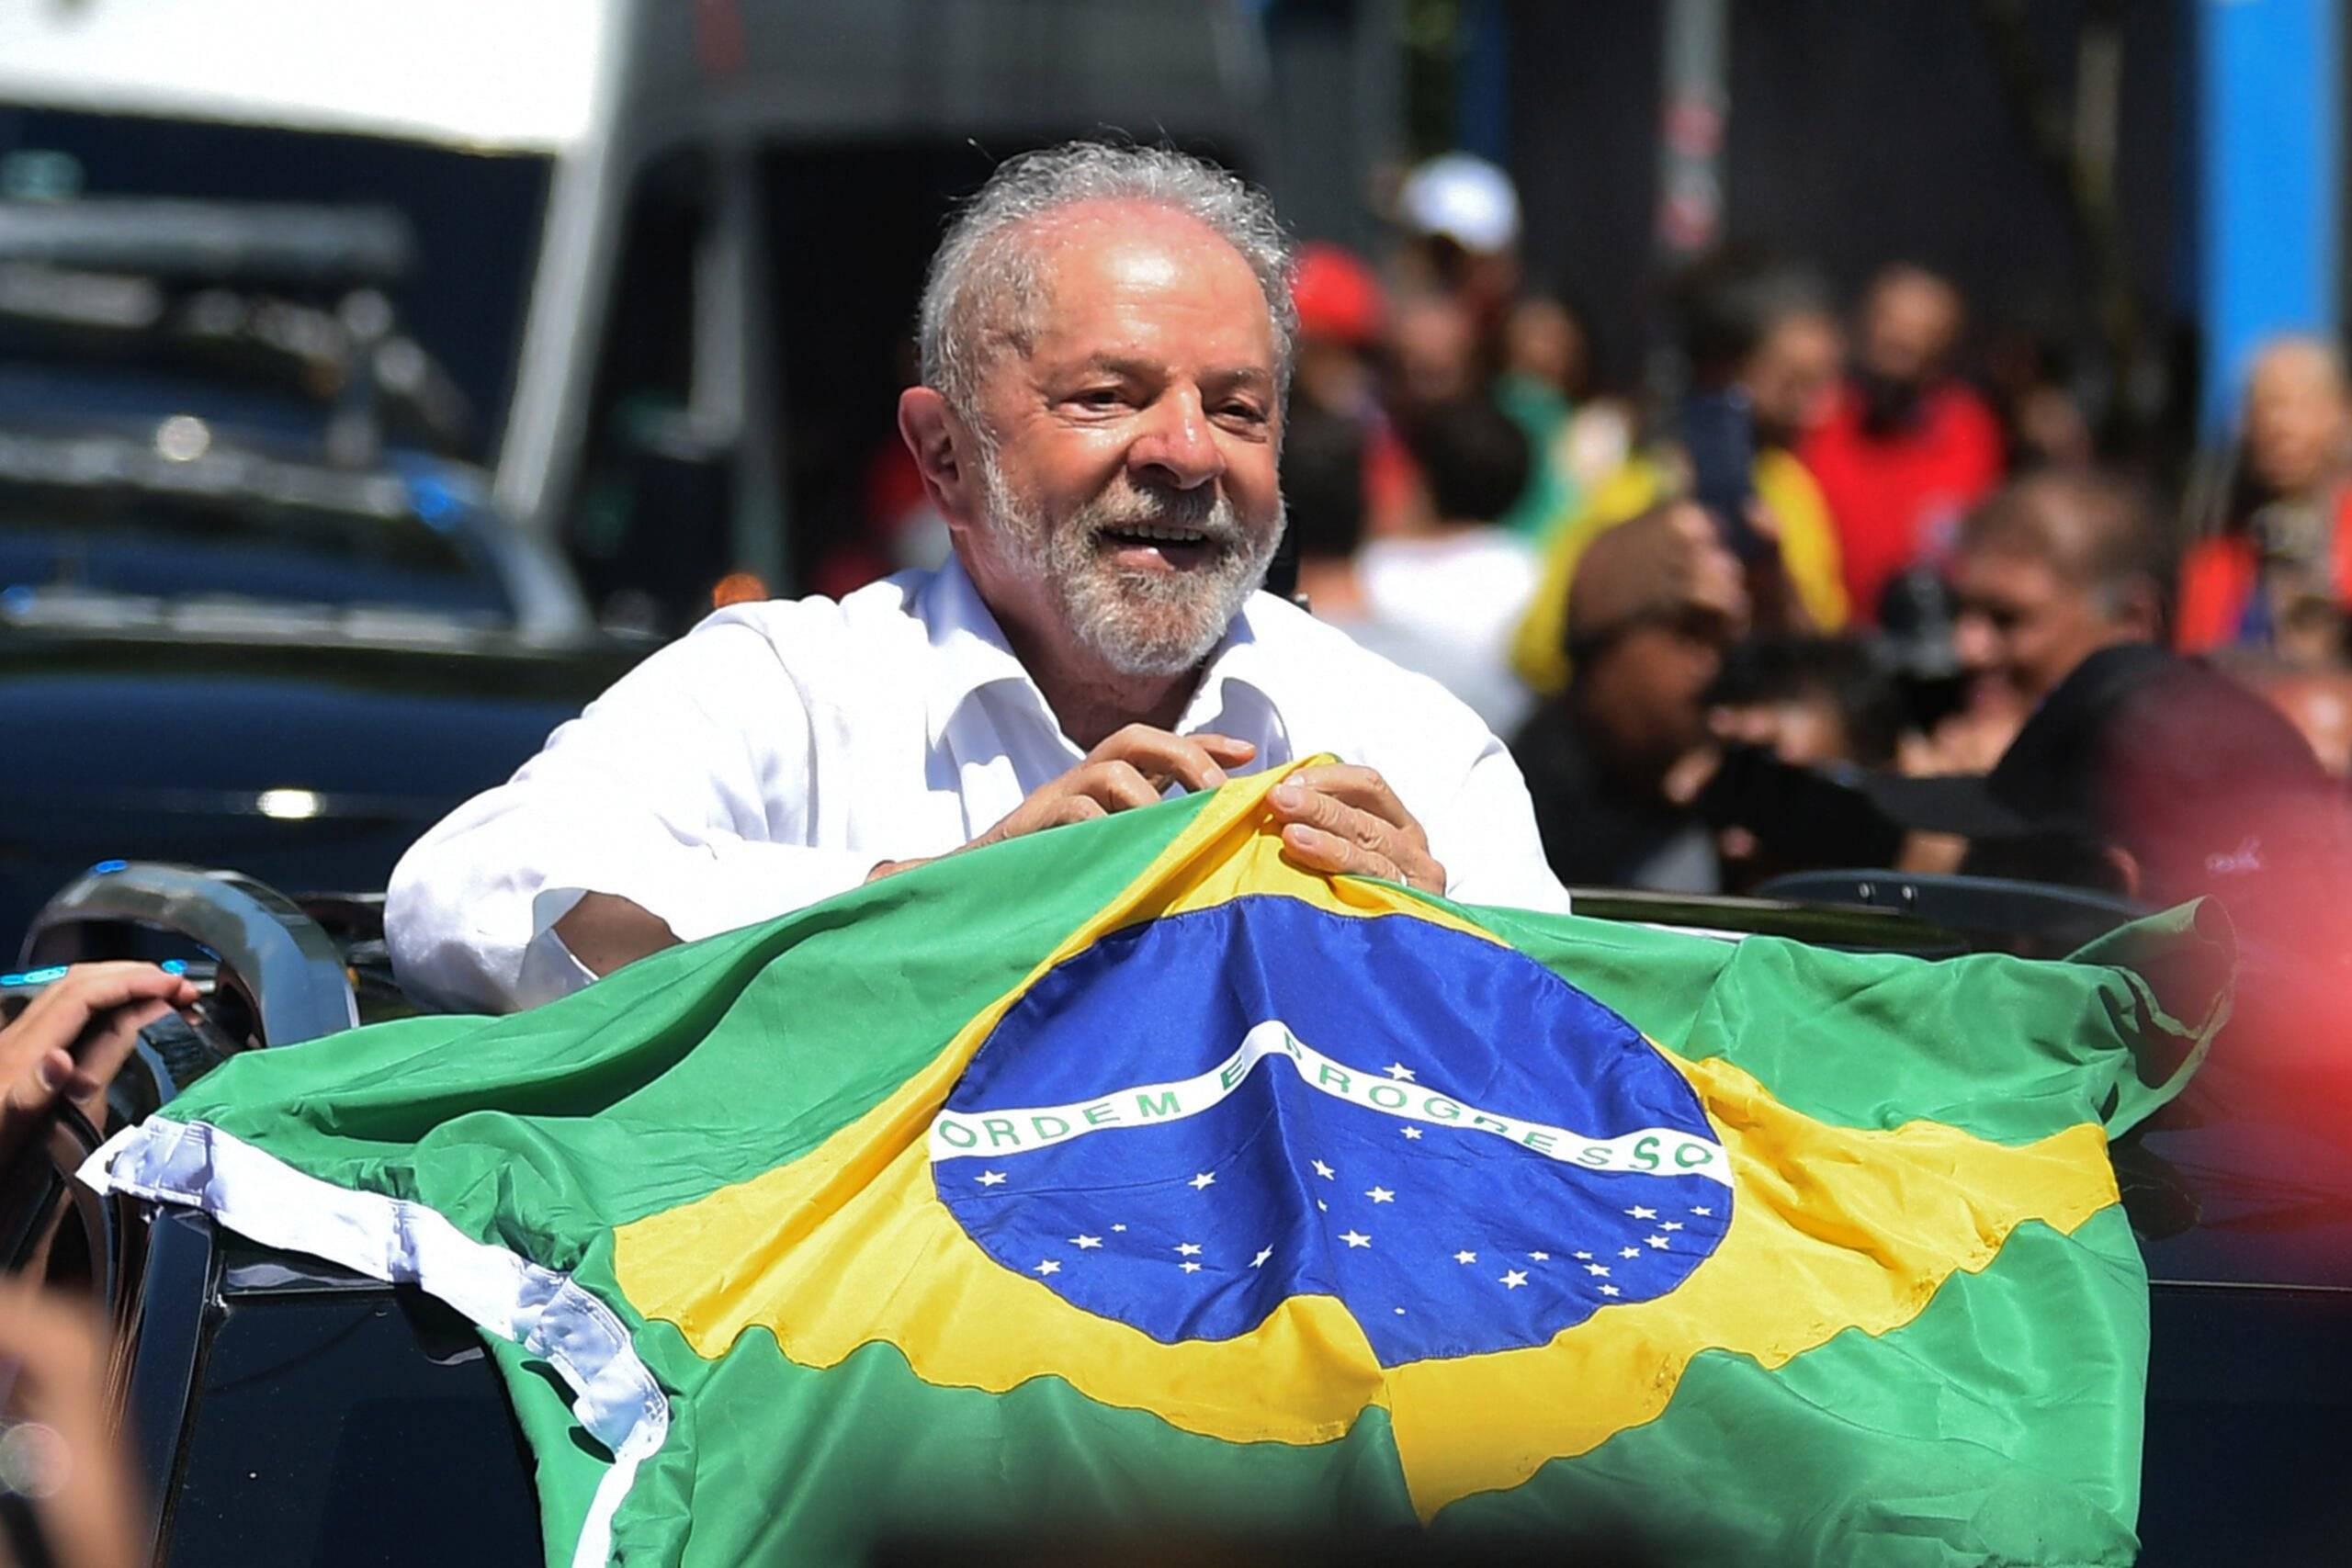 Brazilian former President (2003-2010) and candidate for the leftist Workers Party (PT) Luiz Inacio Lula da Silva holds a Brazilian flag while leaving a polling station during the presidential run-off election, in Sao Paulo, Brazil, on October 30, 2022. - After a bitterly divisive campaign and inconclusive first-round vote, Brazil elects its next president in a cliffhanger runoff between far-right incumbent Jair Bolsonaro and veteran leftist Luiz Inacio Lula da Silva. (Photo by CARL DE SOUZA / AFP)